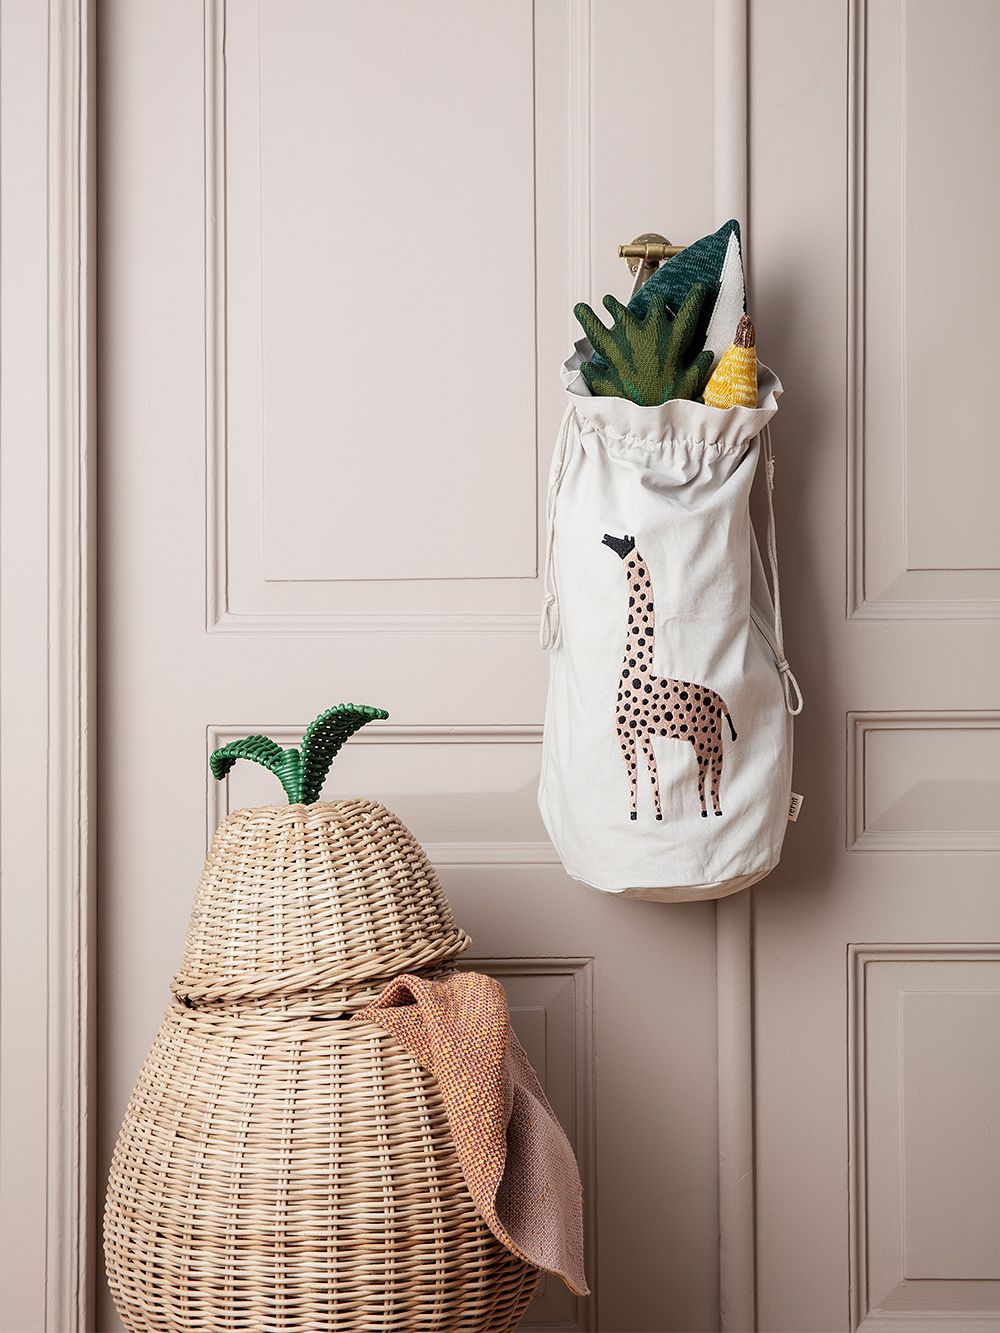 An image of ferm LIVING's rattan Pear basket as part of the kids' room decor.